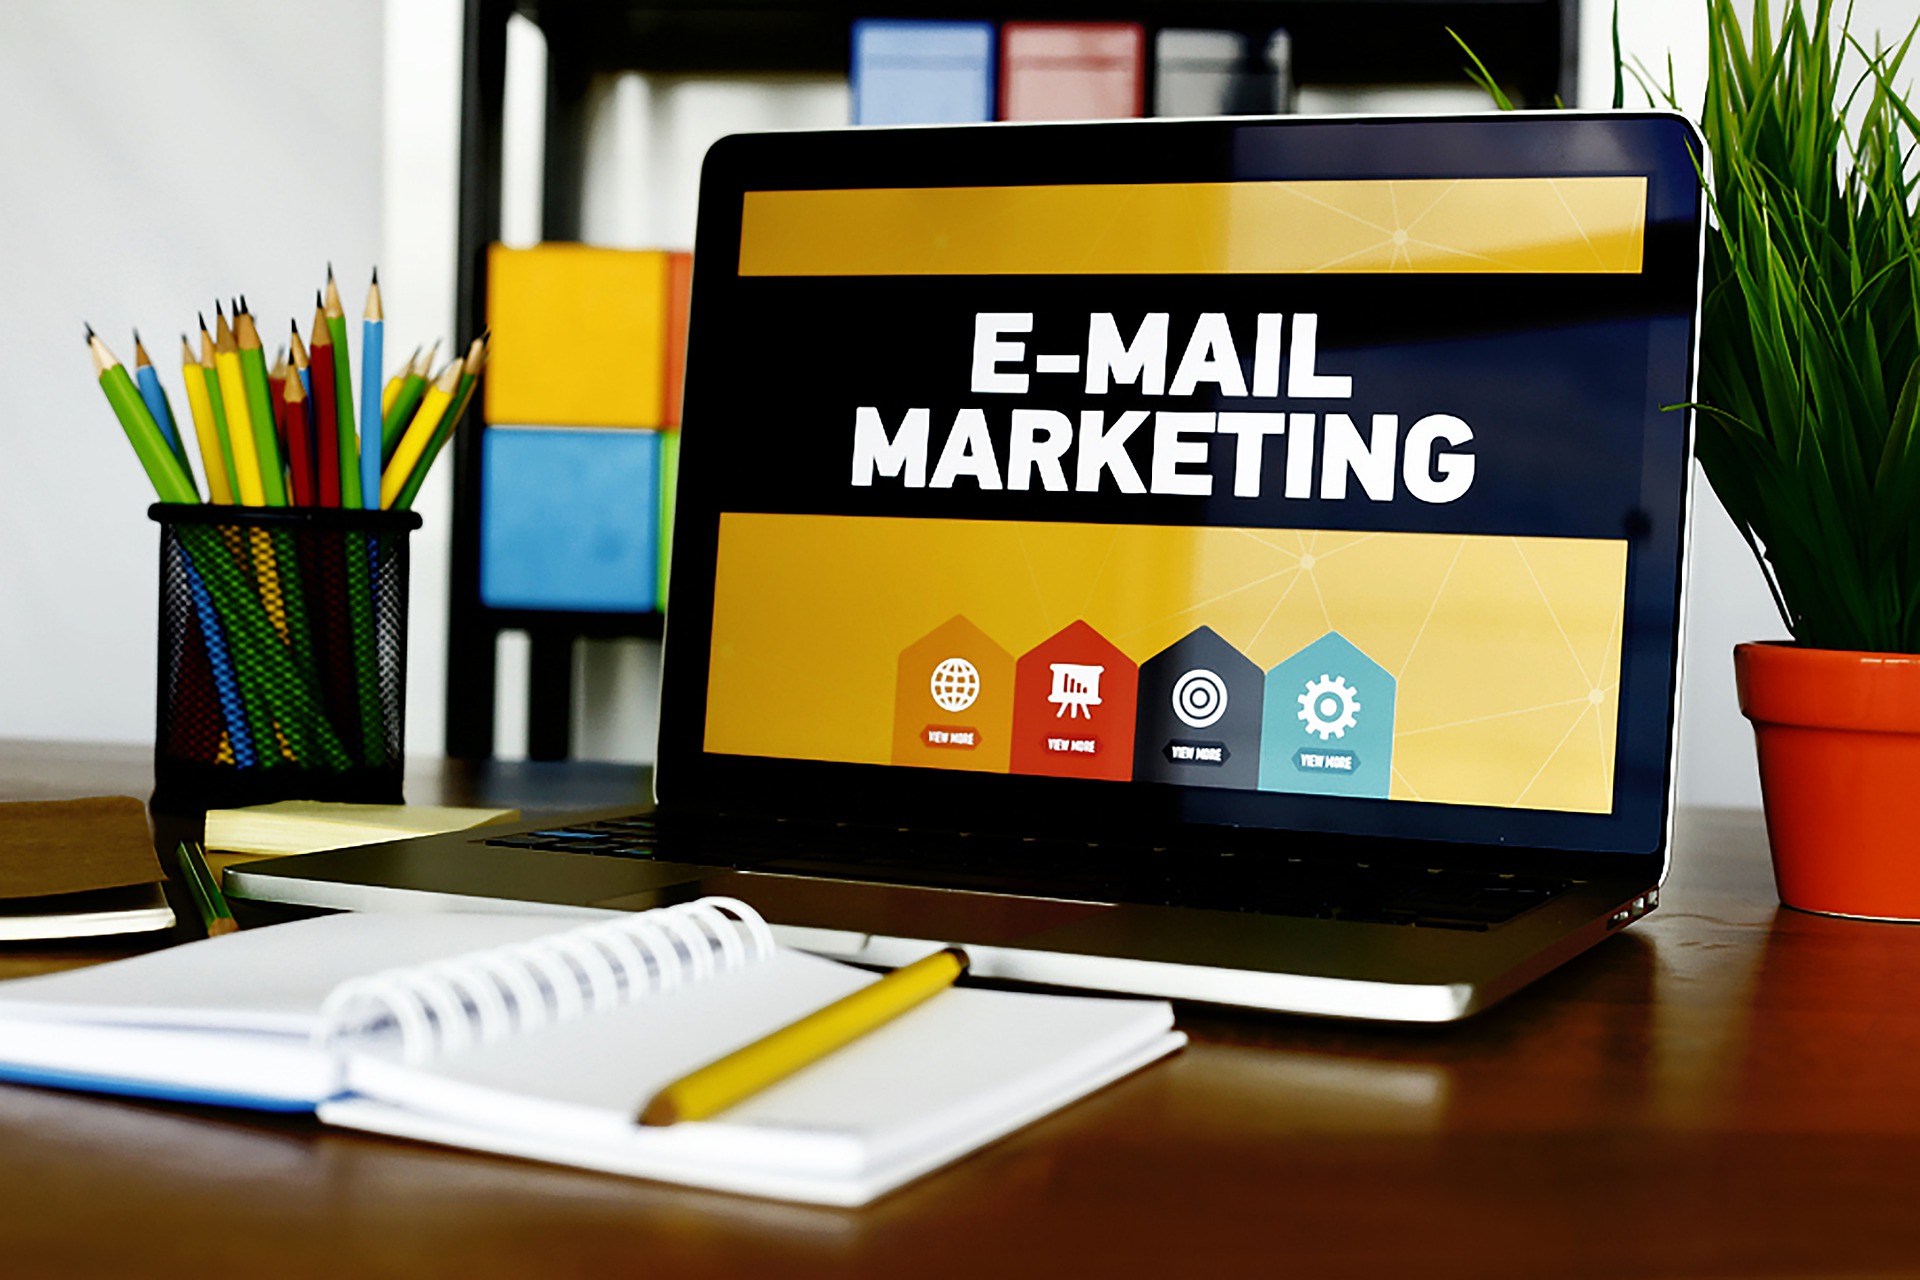 Best Email Marketing Services for Small Businesses